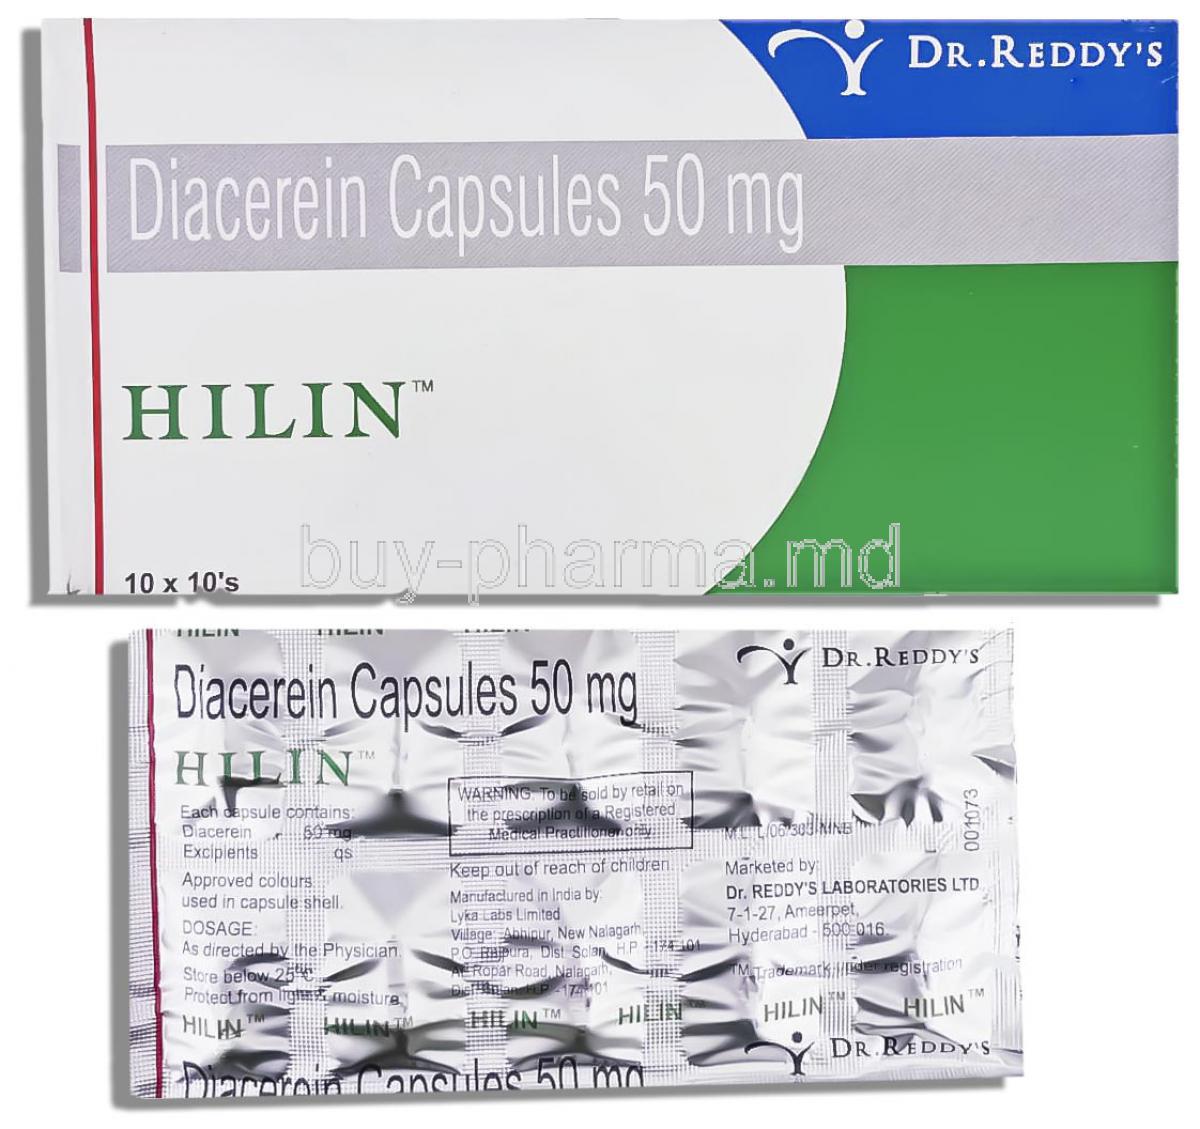 Hilin, Diacerein 50 Mg Capsule (Dr.Reddy's)